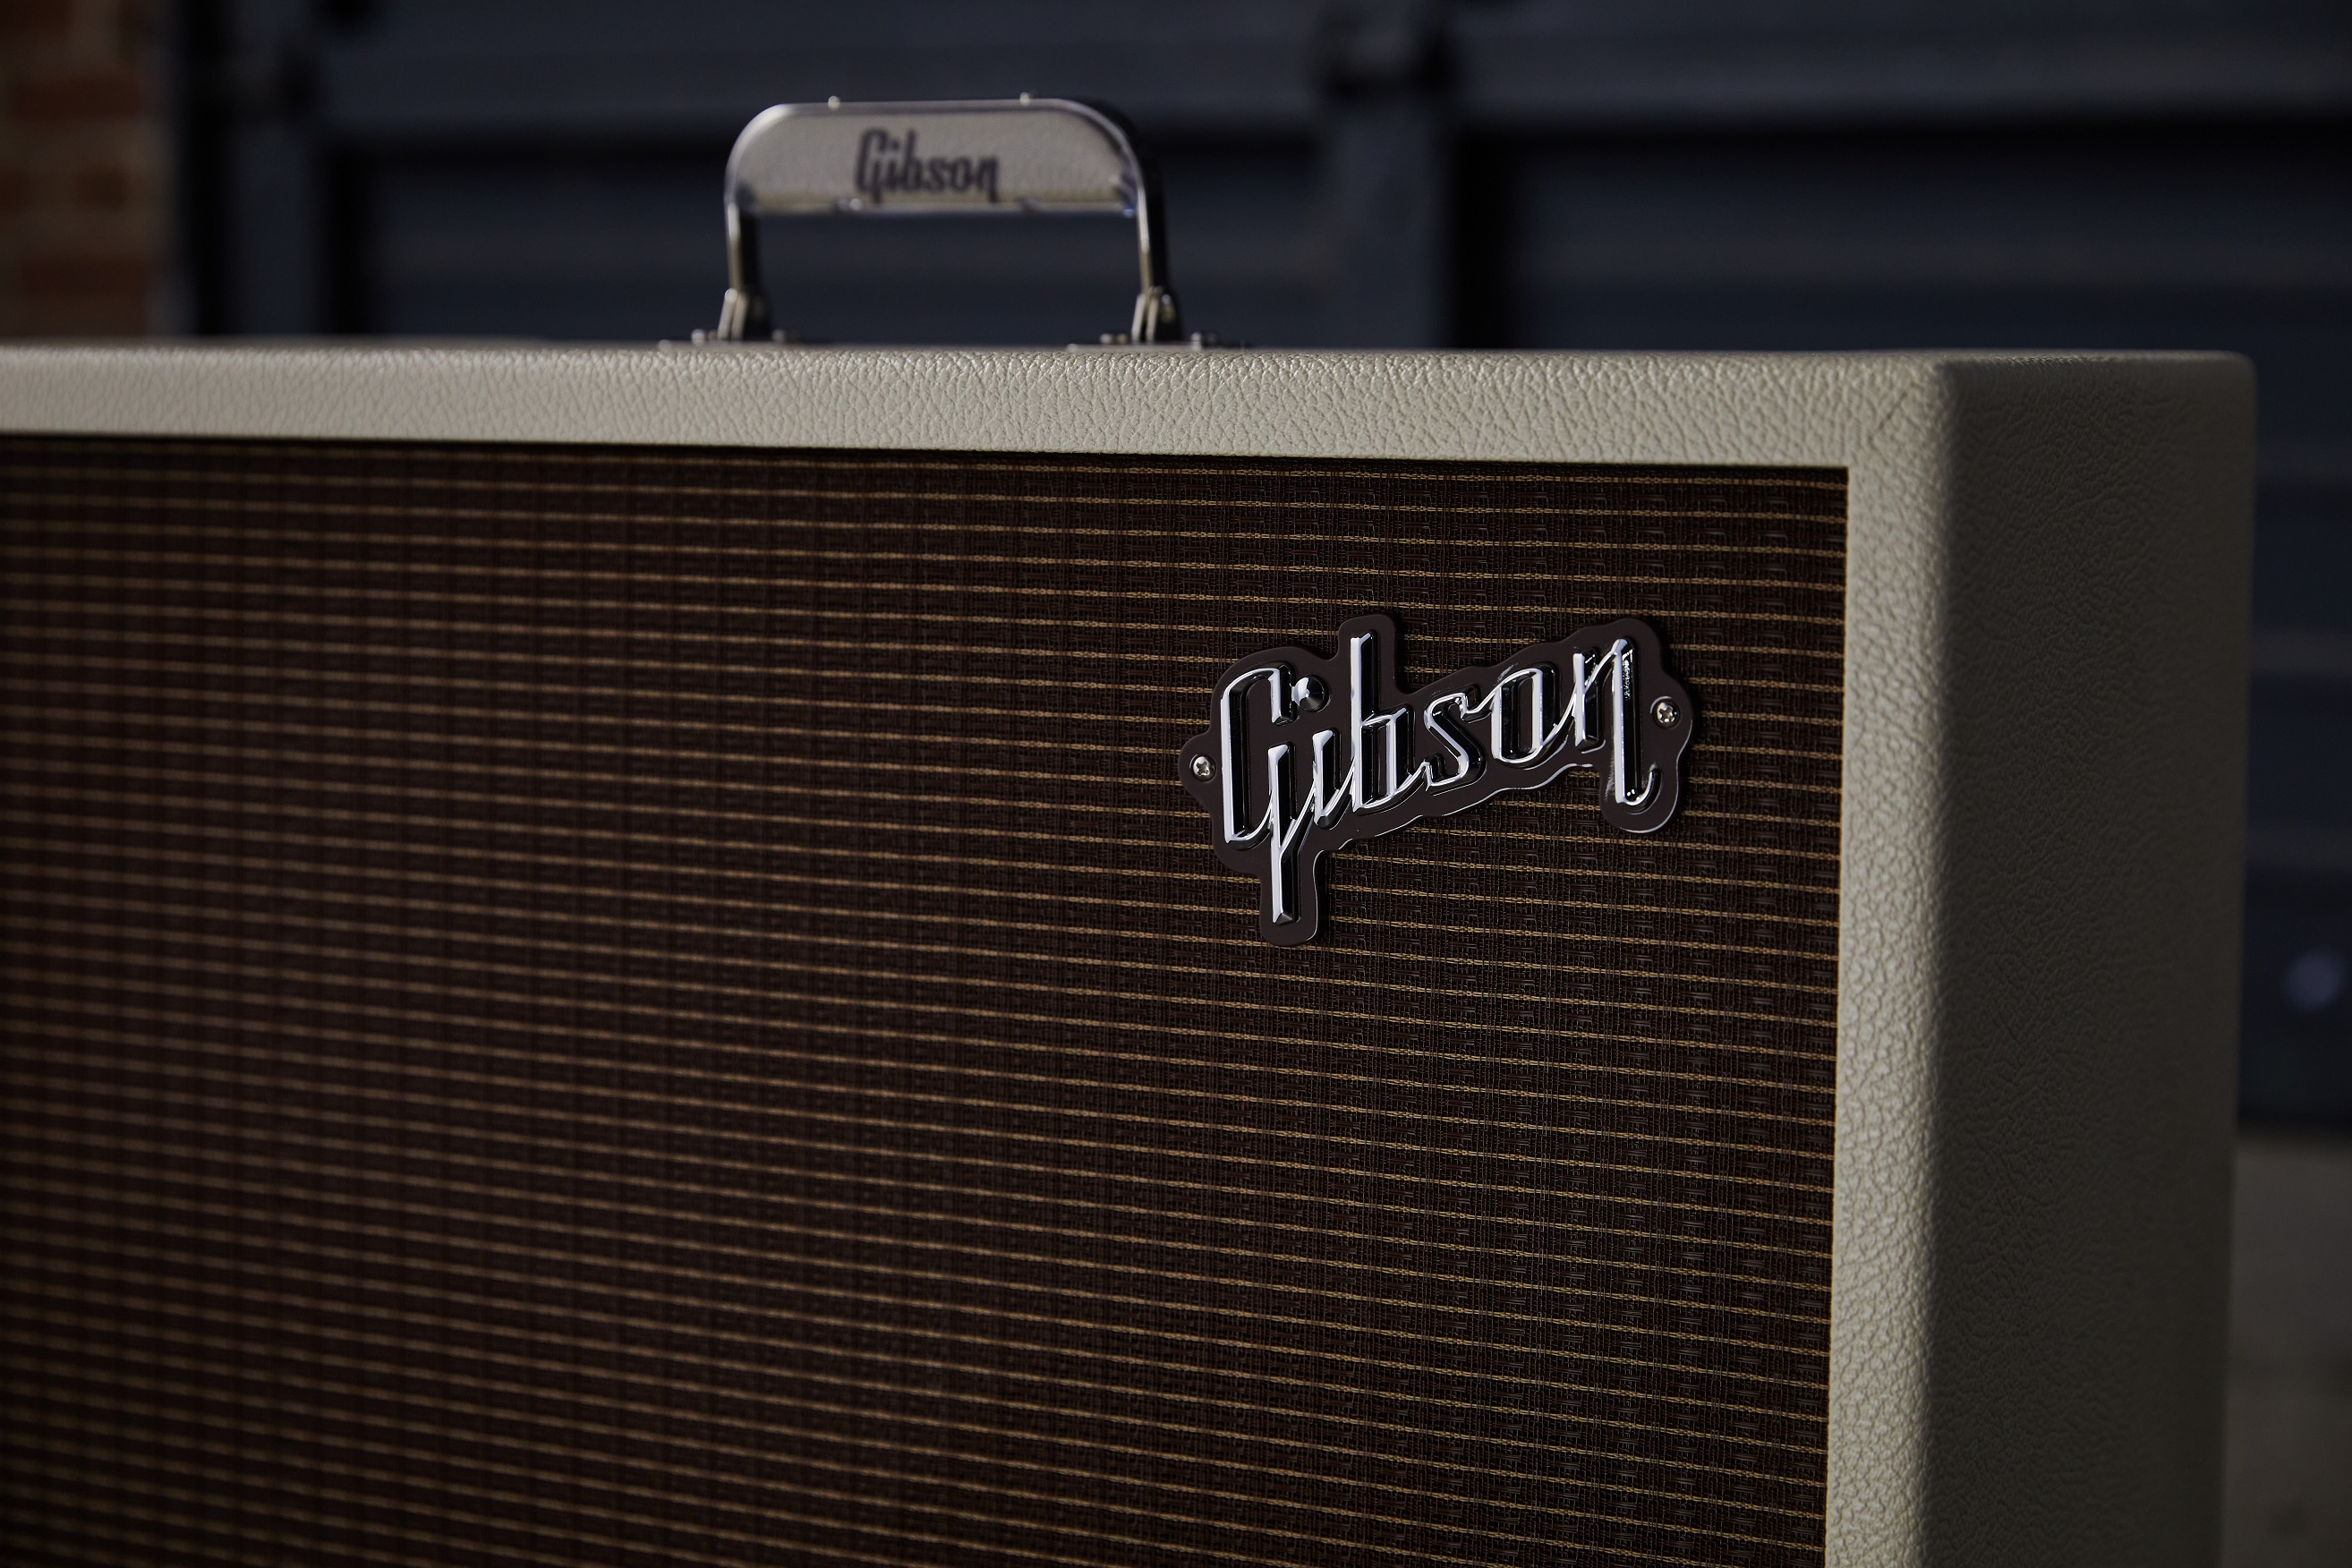 Gibson Dual Falcon 20 Combo 12w 2x10 - Electric guitar combo amp - Variation 3